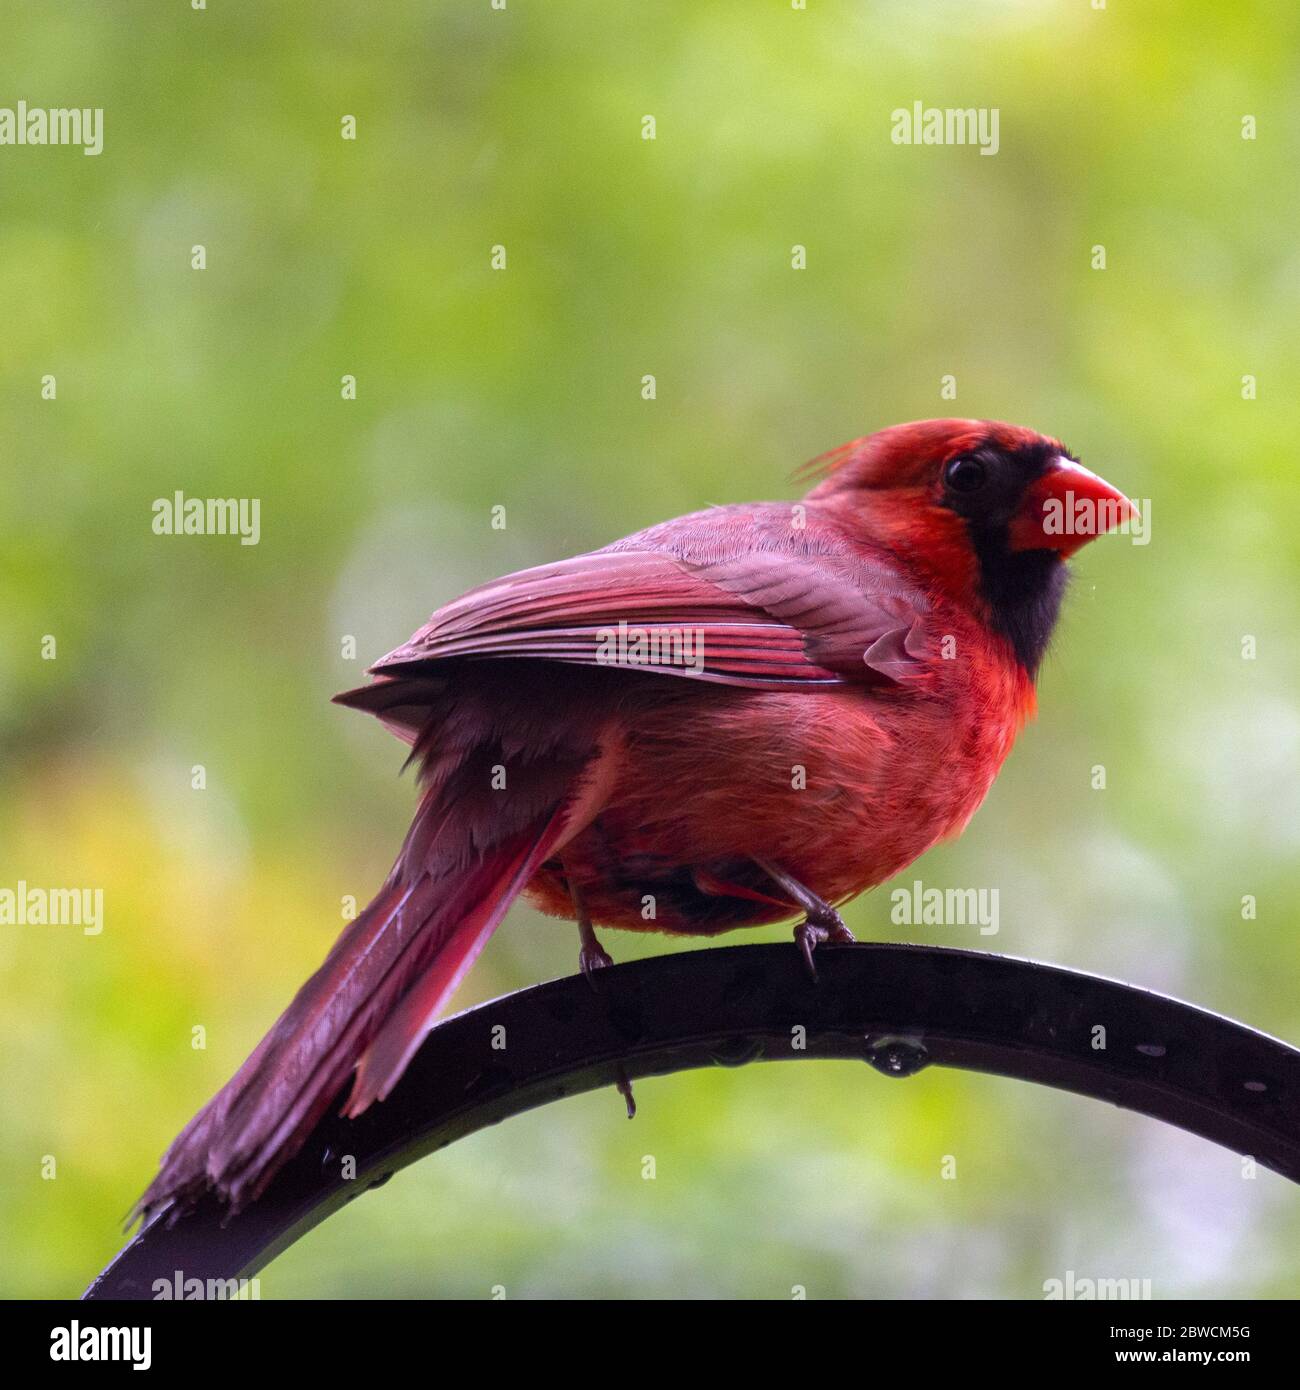 A male cardinal perches on a shepherds hook and looks back over his shoulder at the camera.  Background blurred. Stock Photo